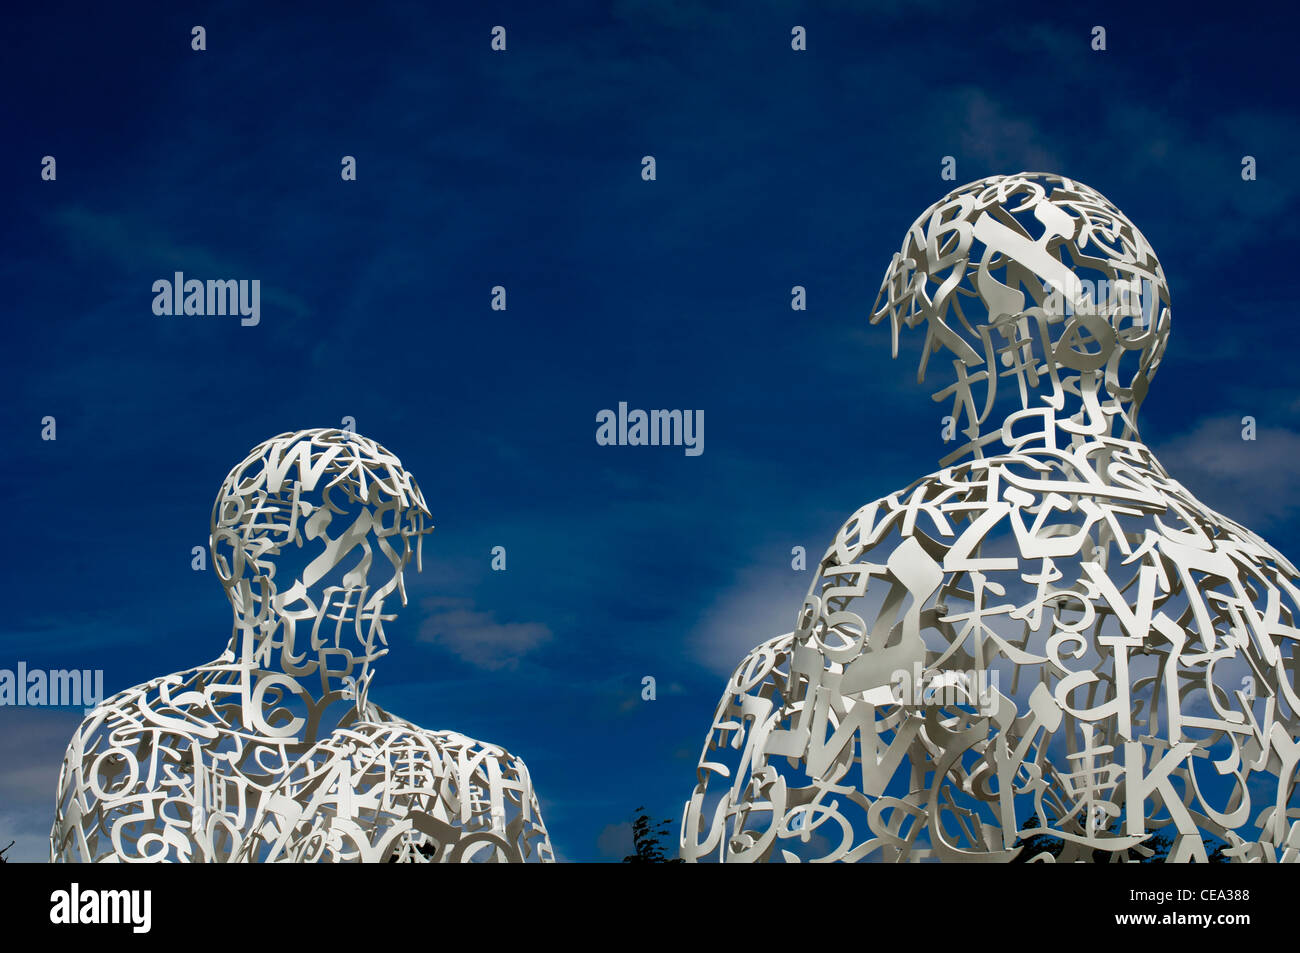 Works of art by Spanish artist Jaume Plensa at the Yorkshire Sculpture Park. Stock Photo